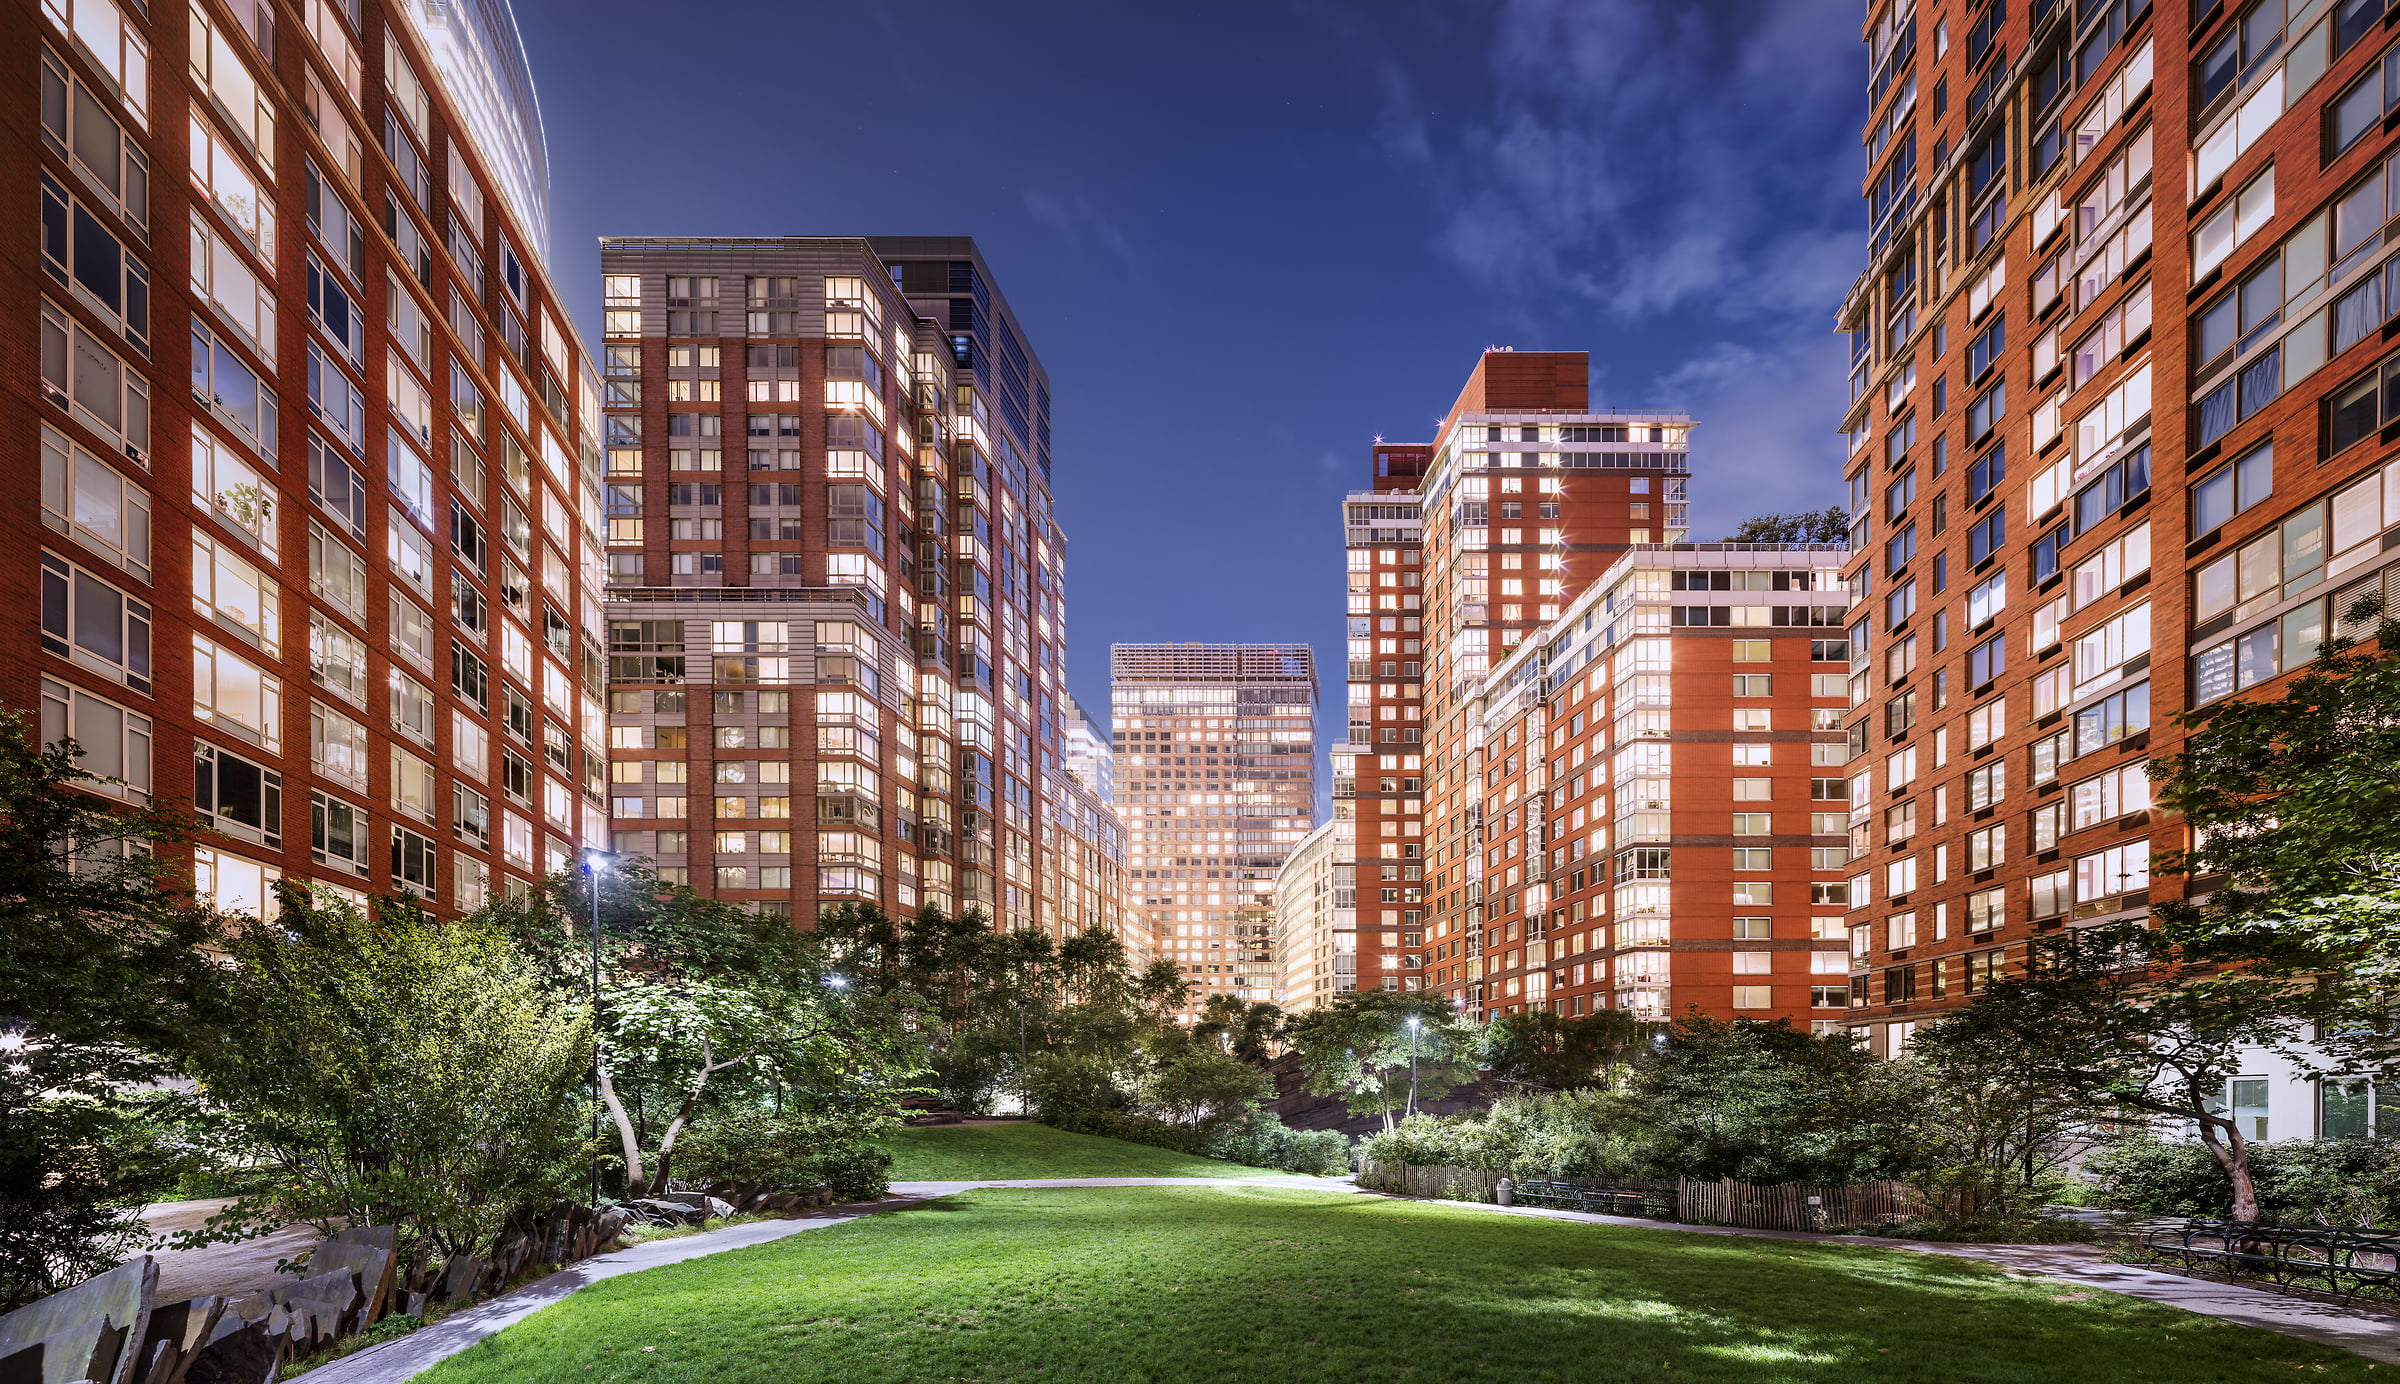 719 megapixels! A very high definition VAST photo of Teardrop Park in Battery Park City, NYC; created by Dan Piech